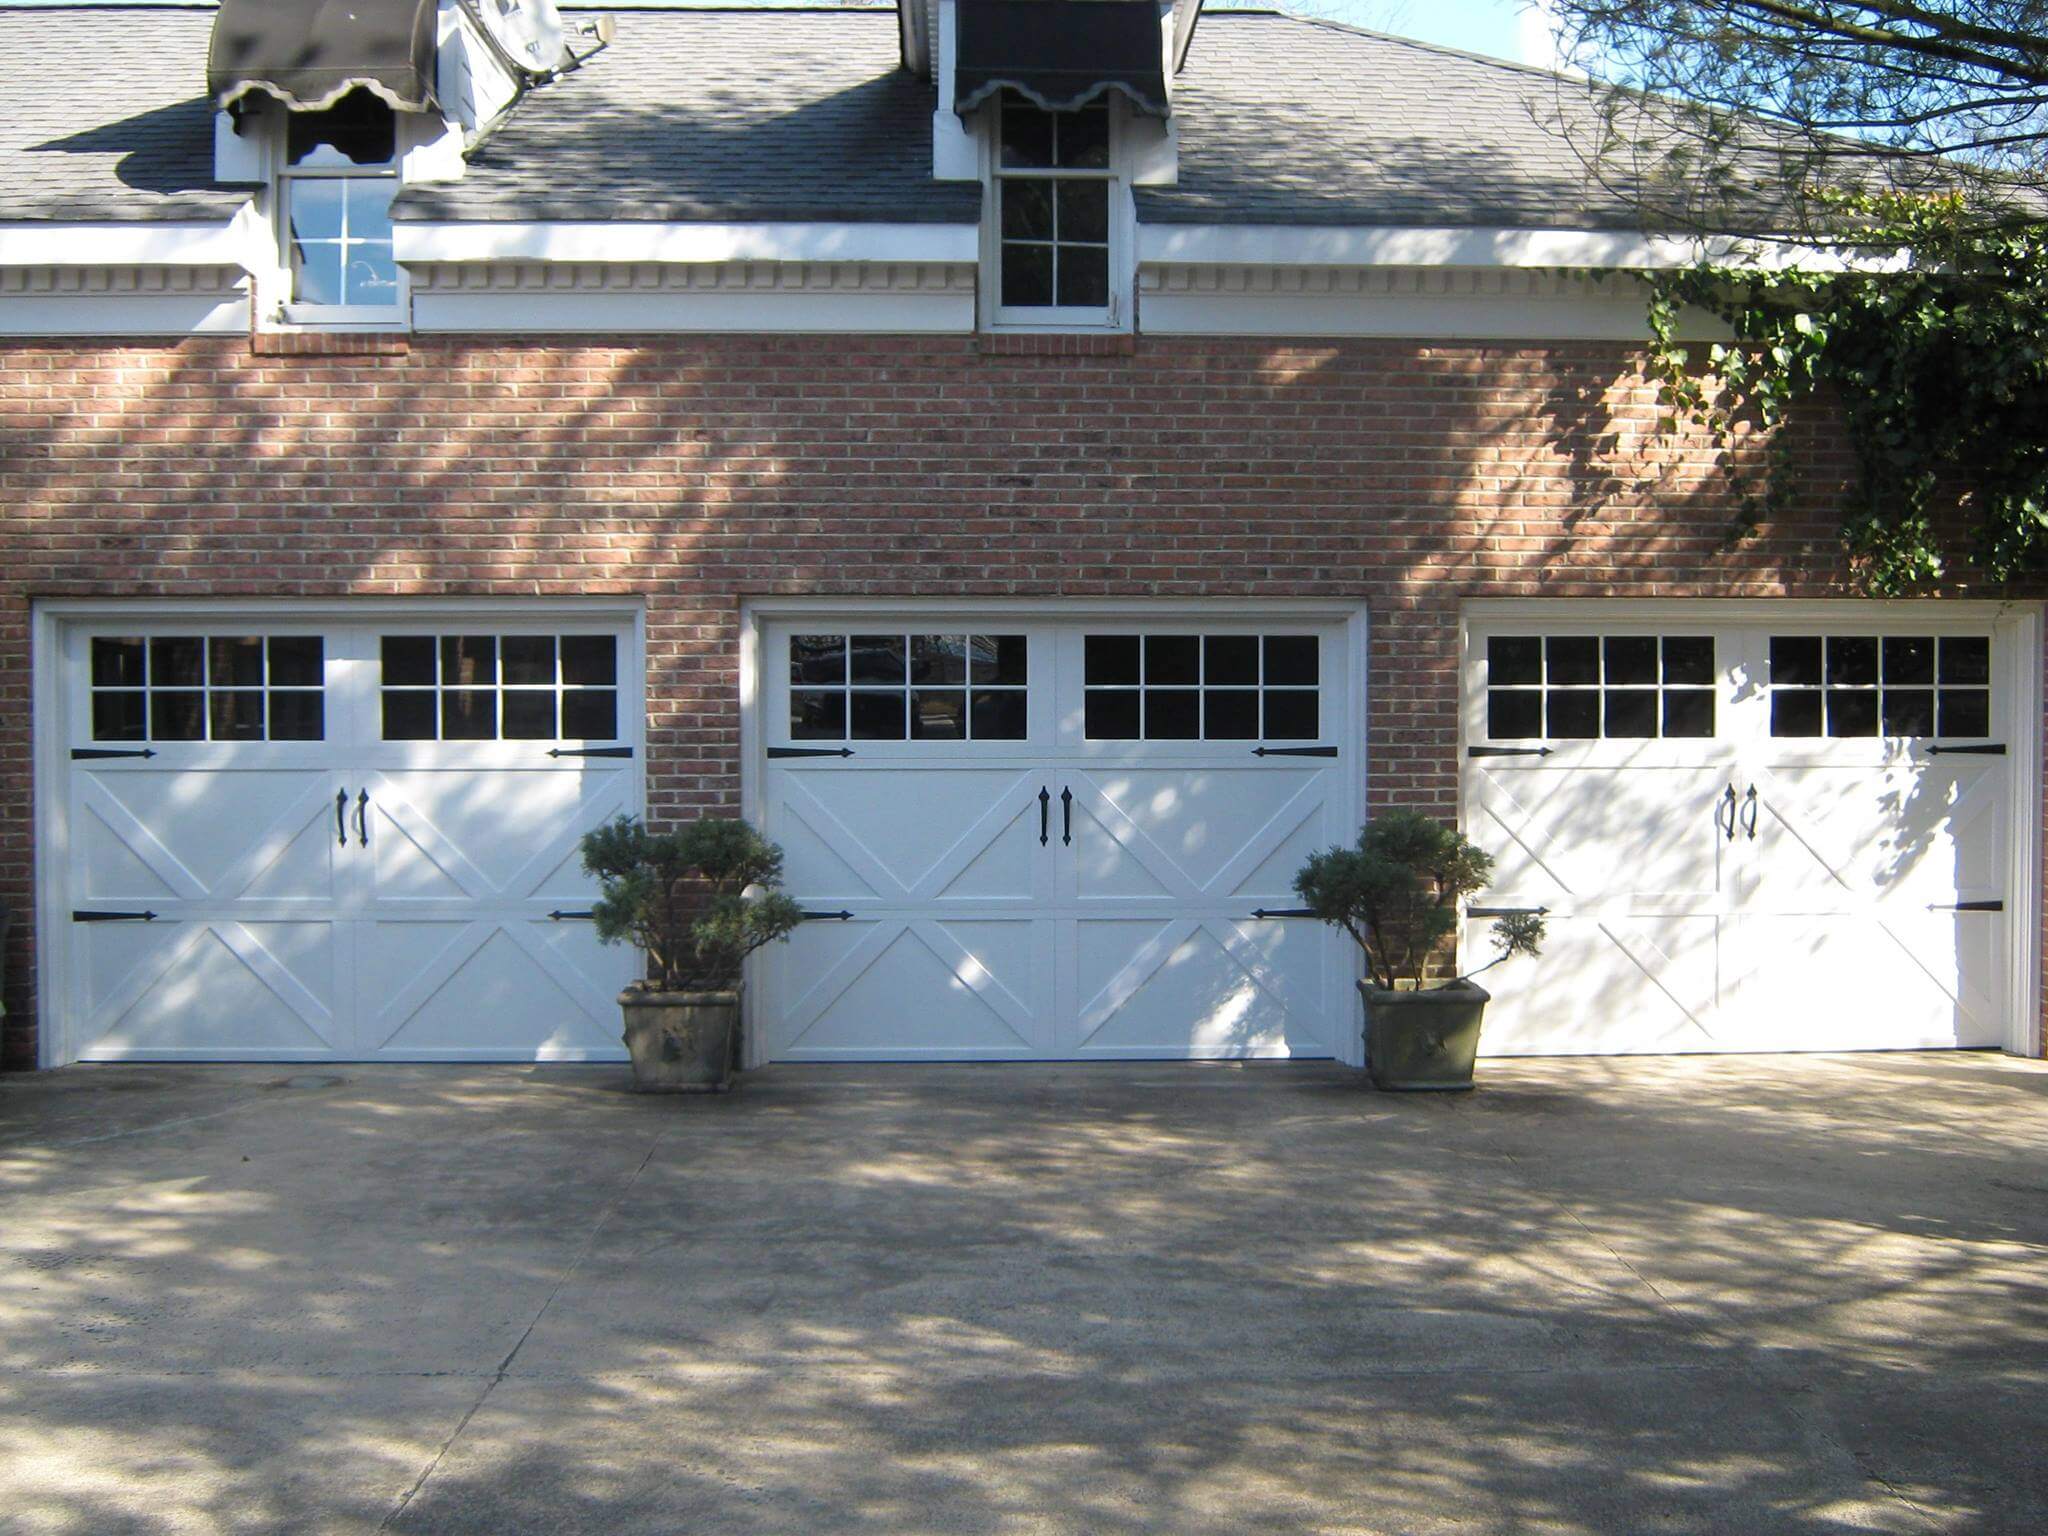 3 carriage house garage doors after professional installation